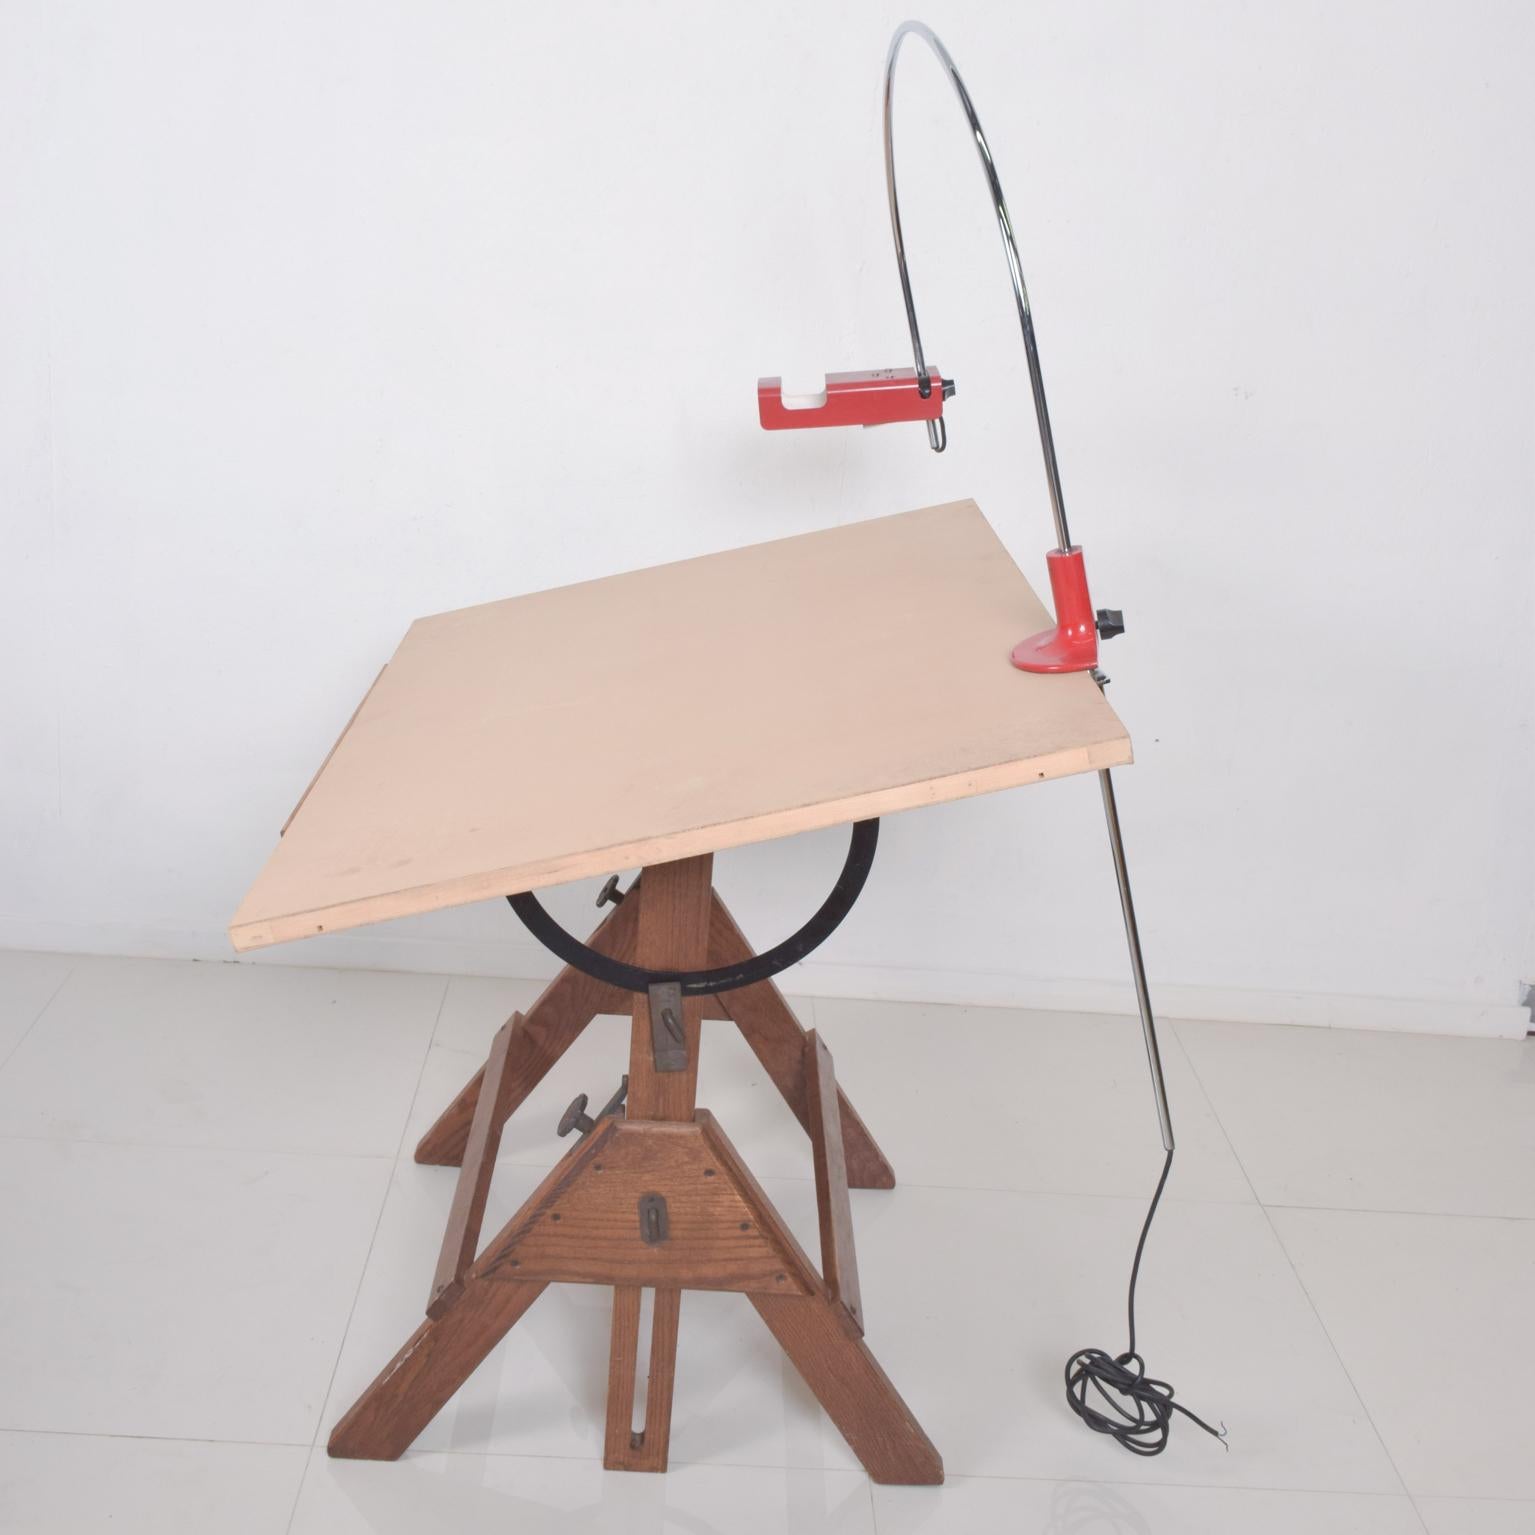 1969 Joe Colombo Architectural Red Spider Task Desk Lamp by Oluce Italy For Sale 6